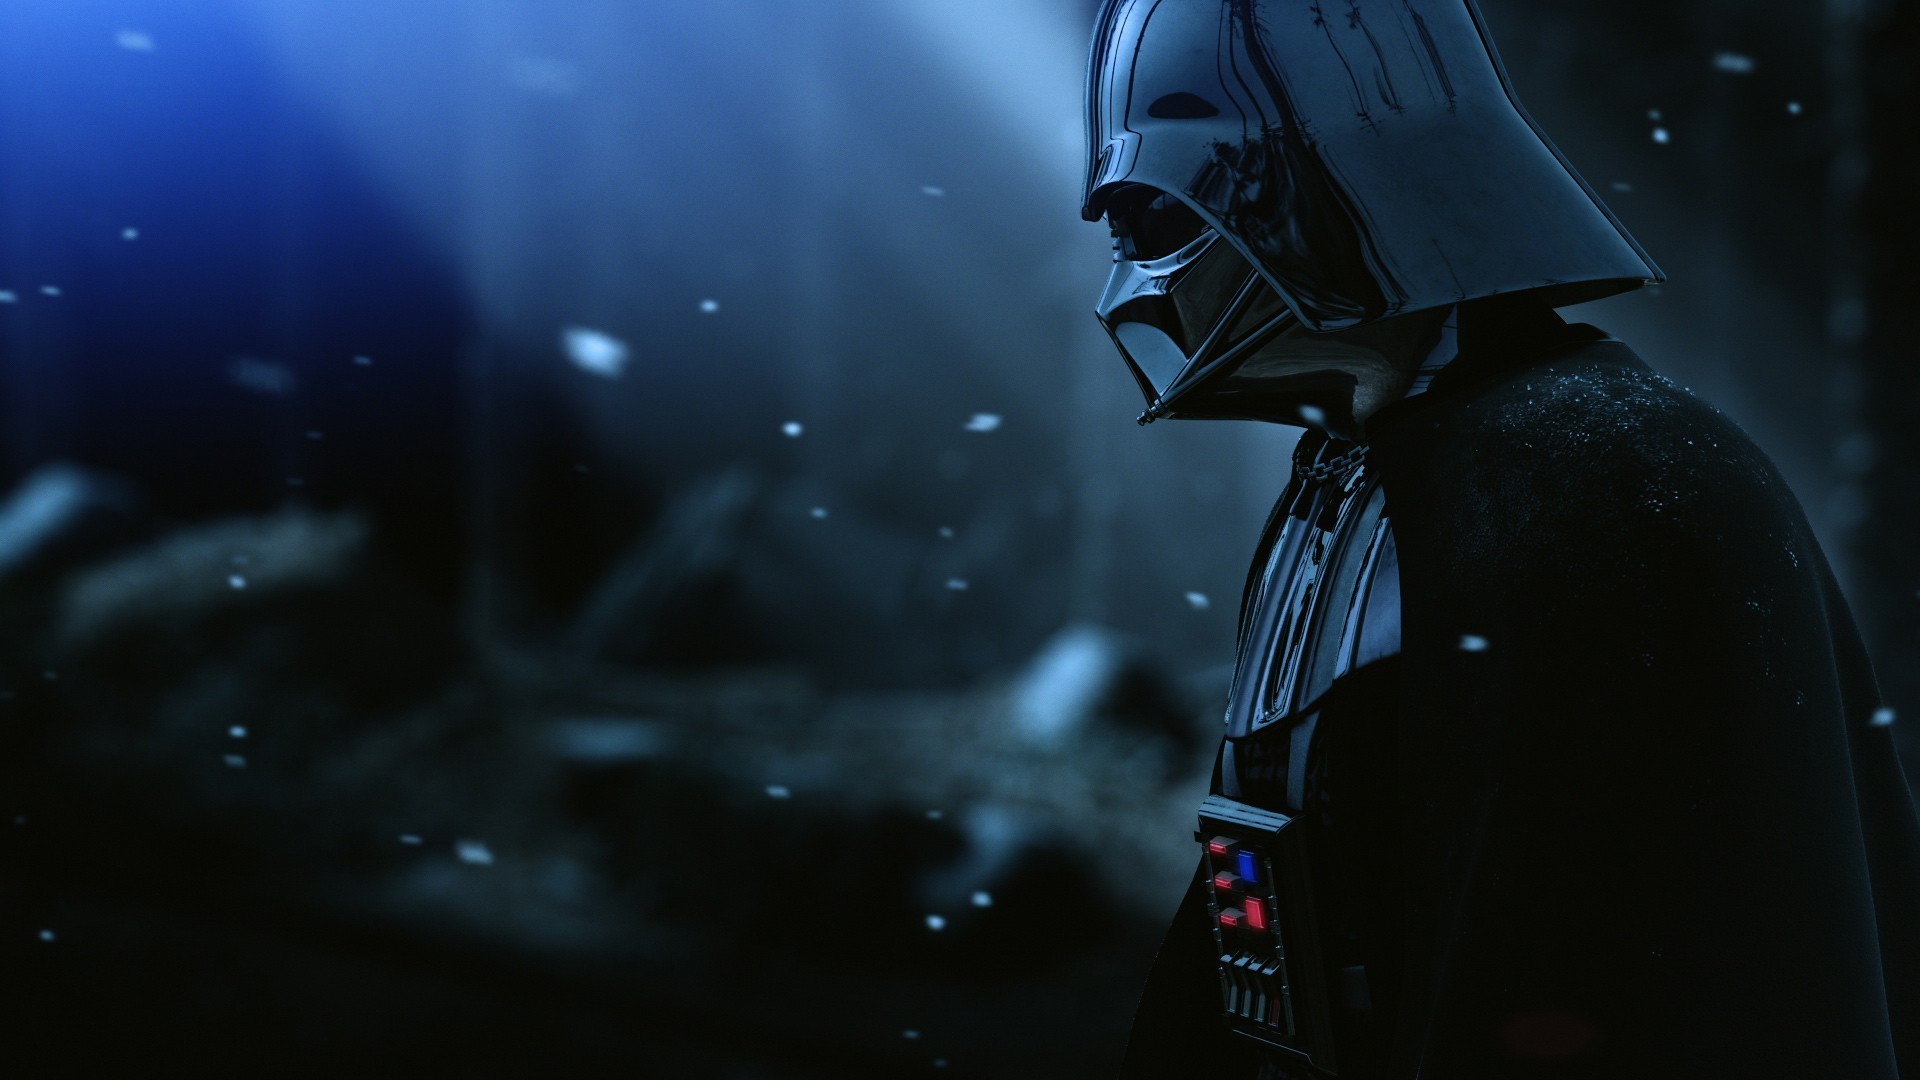 1920x1080 this star wars wallpaper pack contains 31 unique wallpapers in full hd .